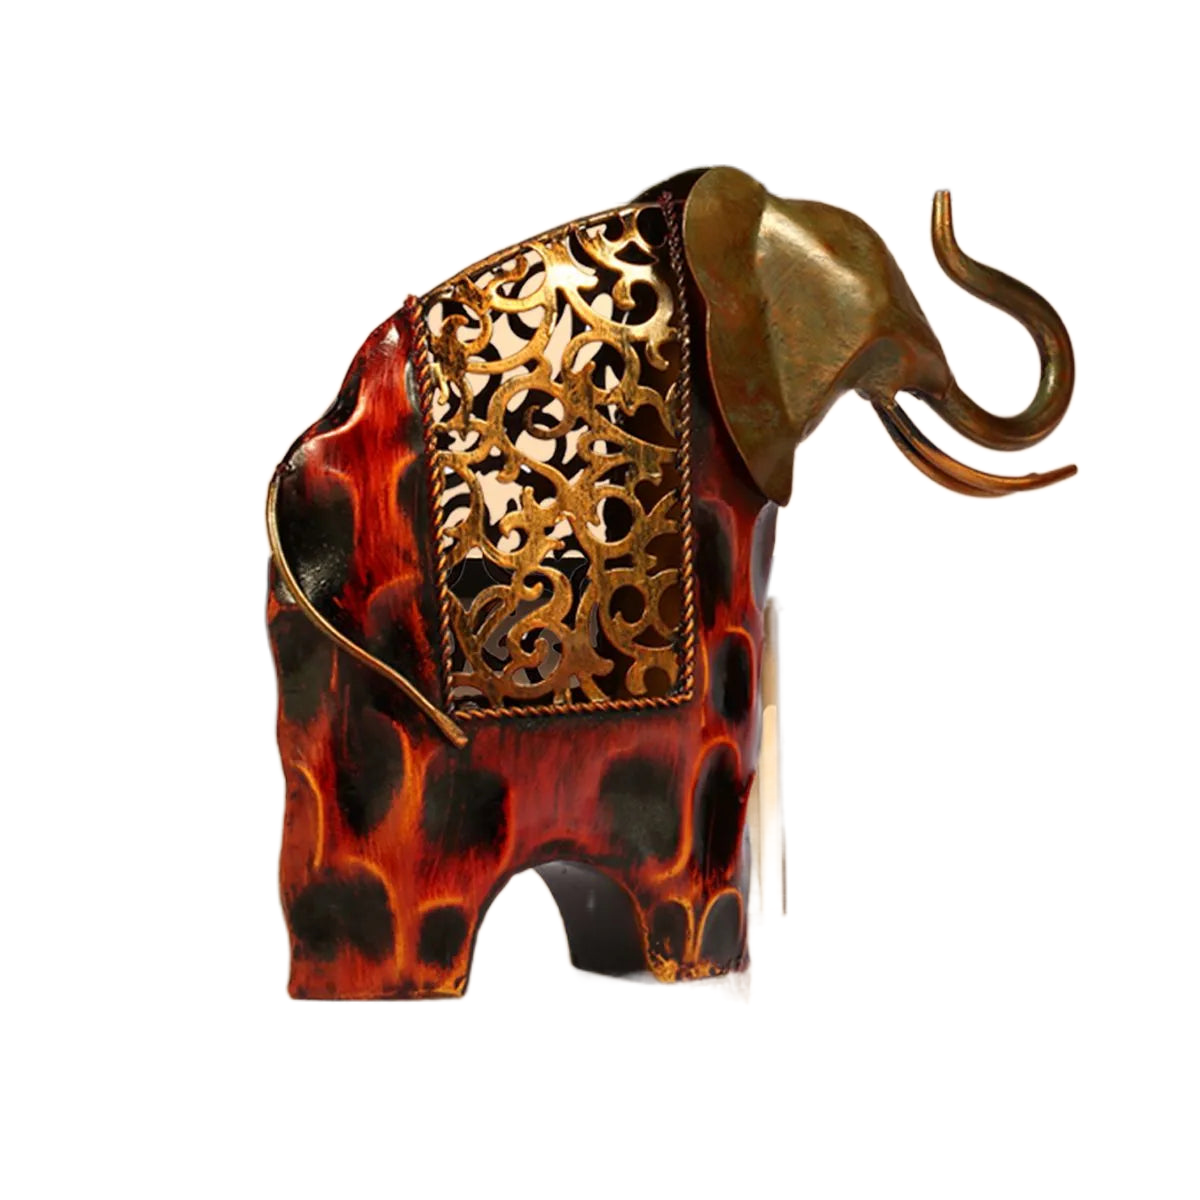 Carved iron art elephant Metal animal sculpture  Home furnishing Articles Handicrafts acacuss